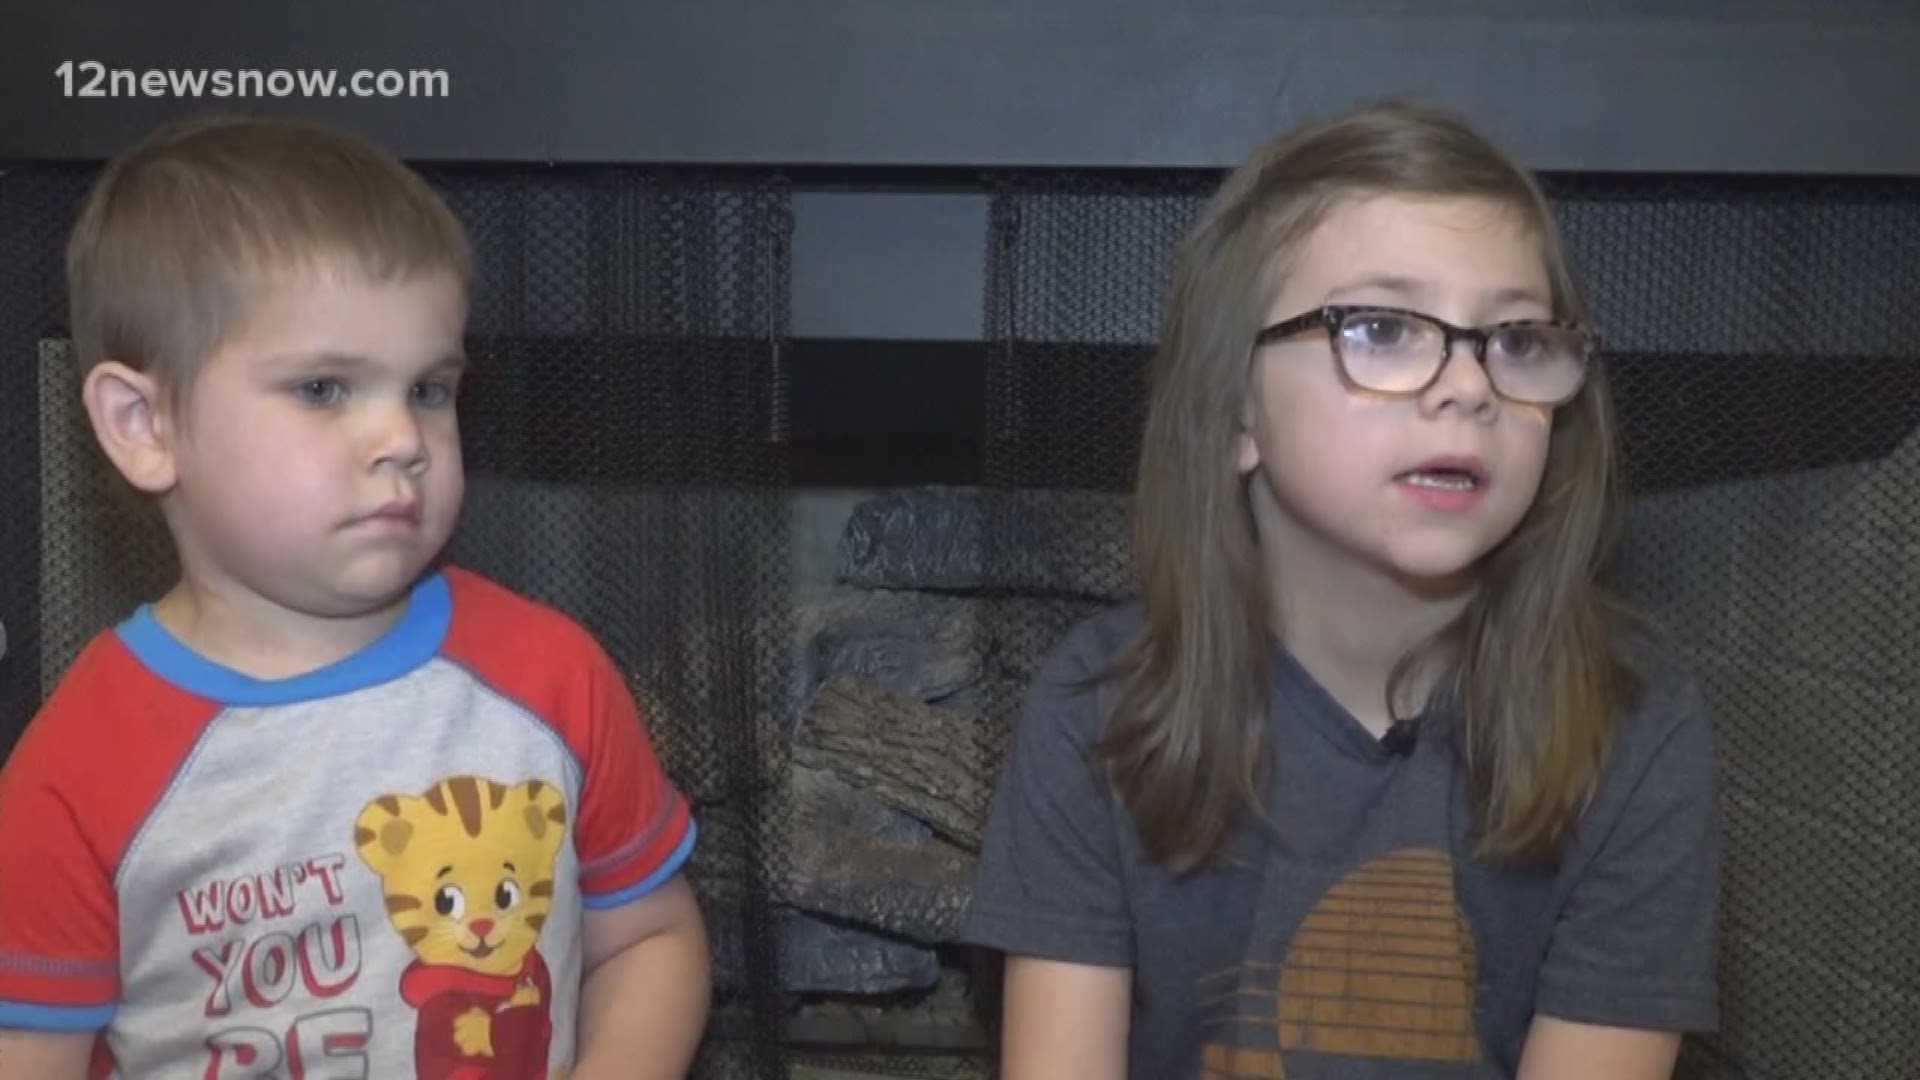 For the last year, these two kids have formed a bond unlike any other.